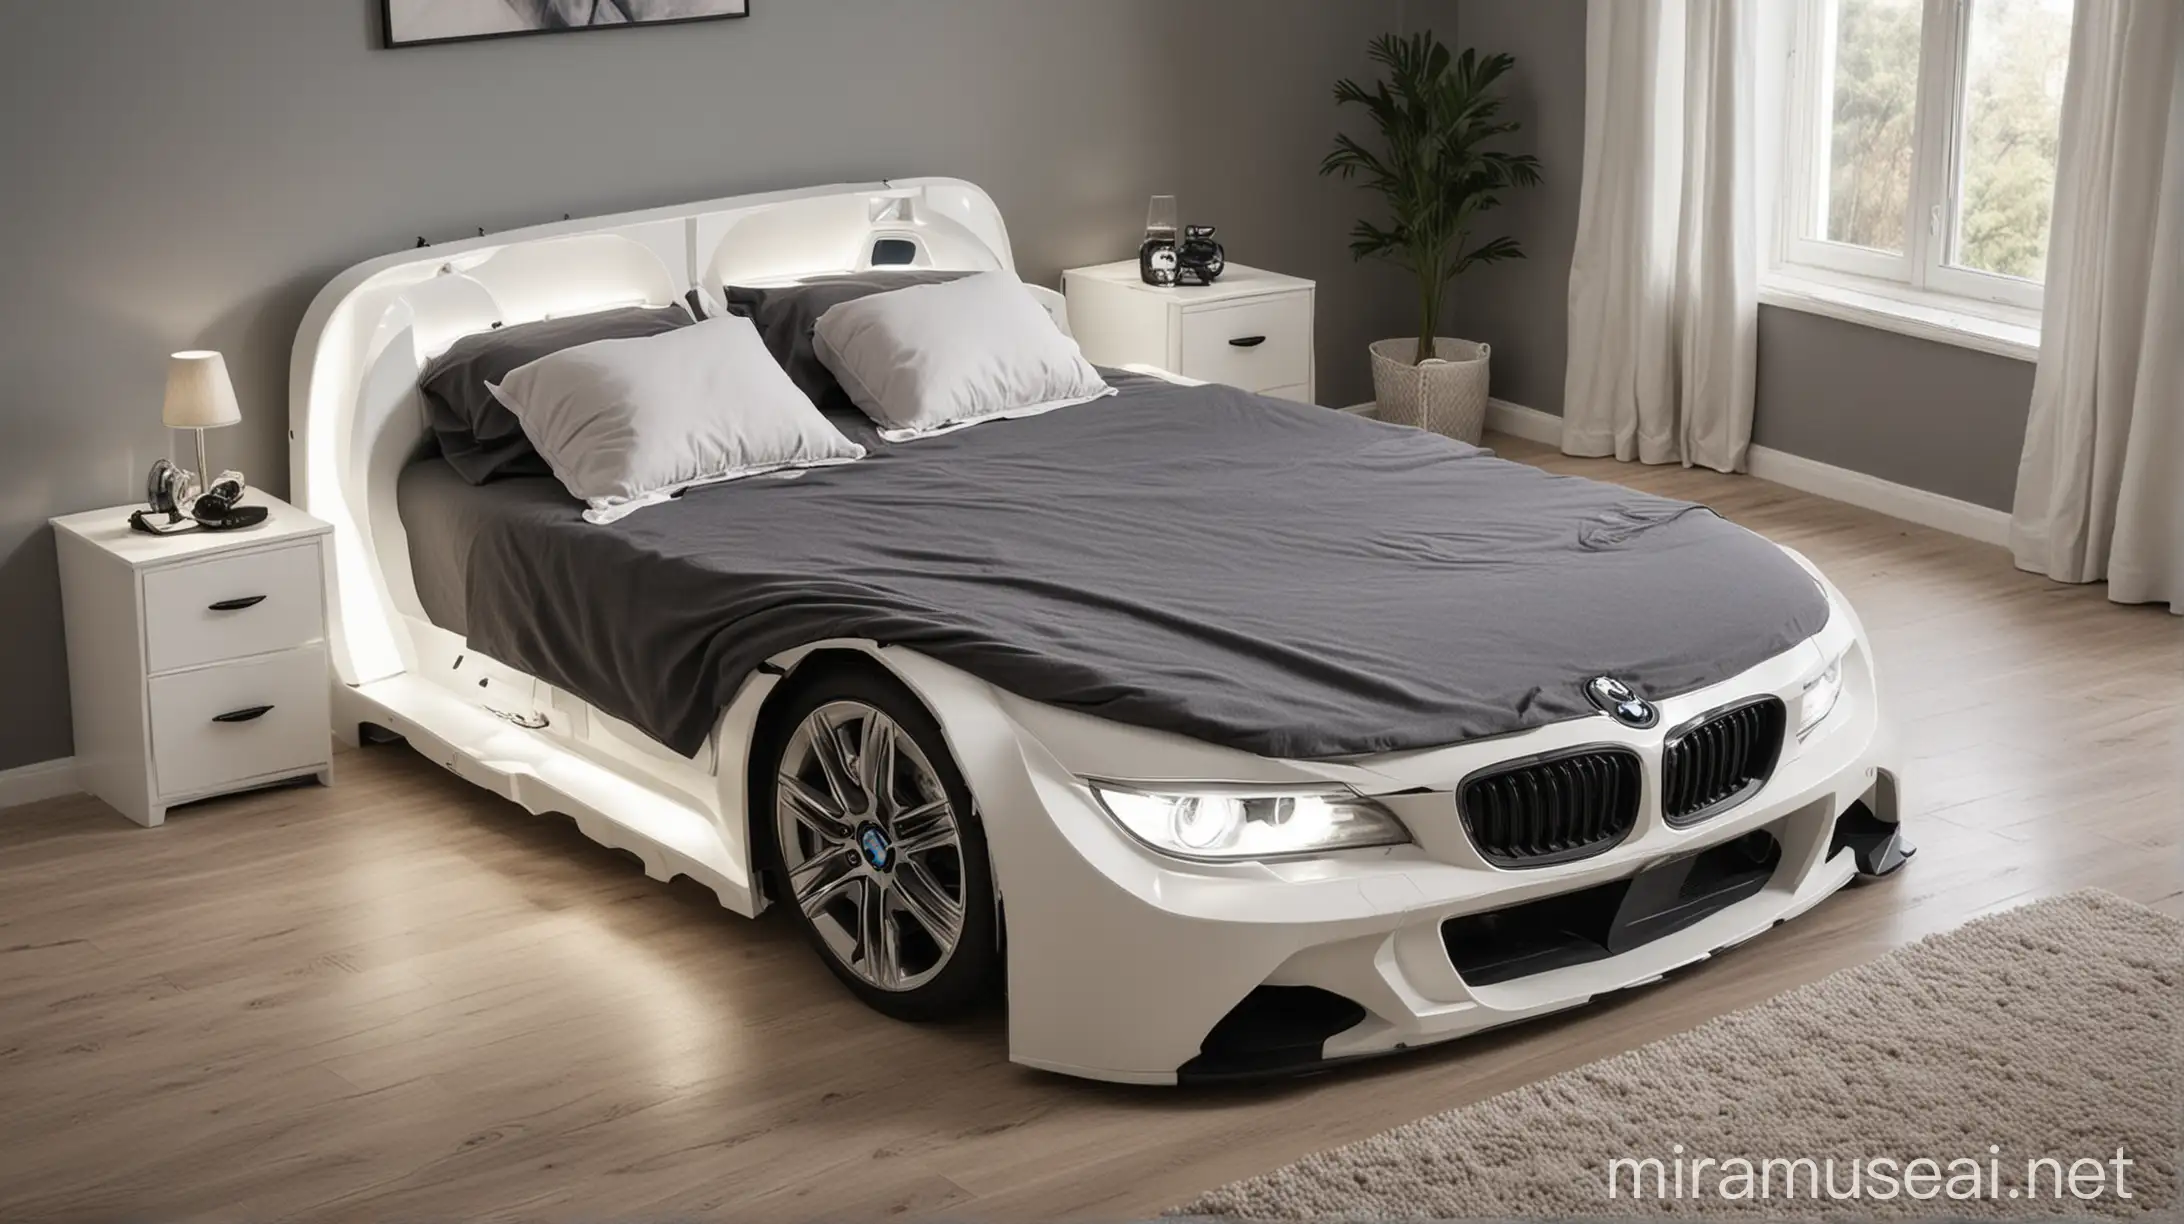 Luxurious BMW CarShaped Double Bed